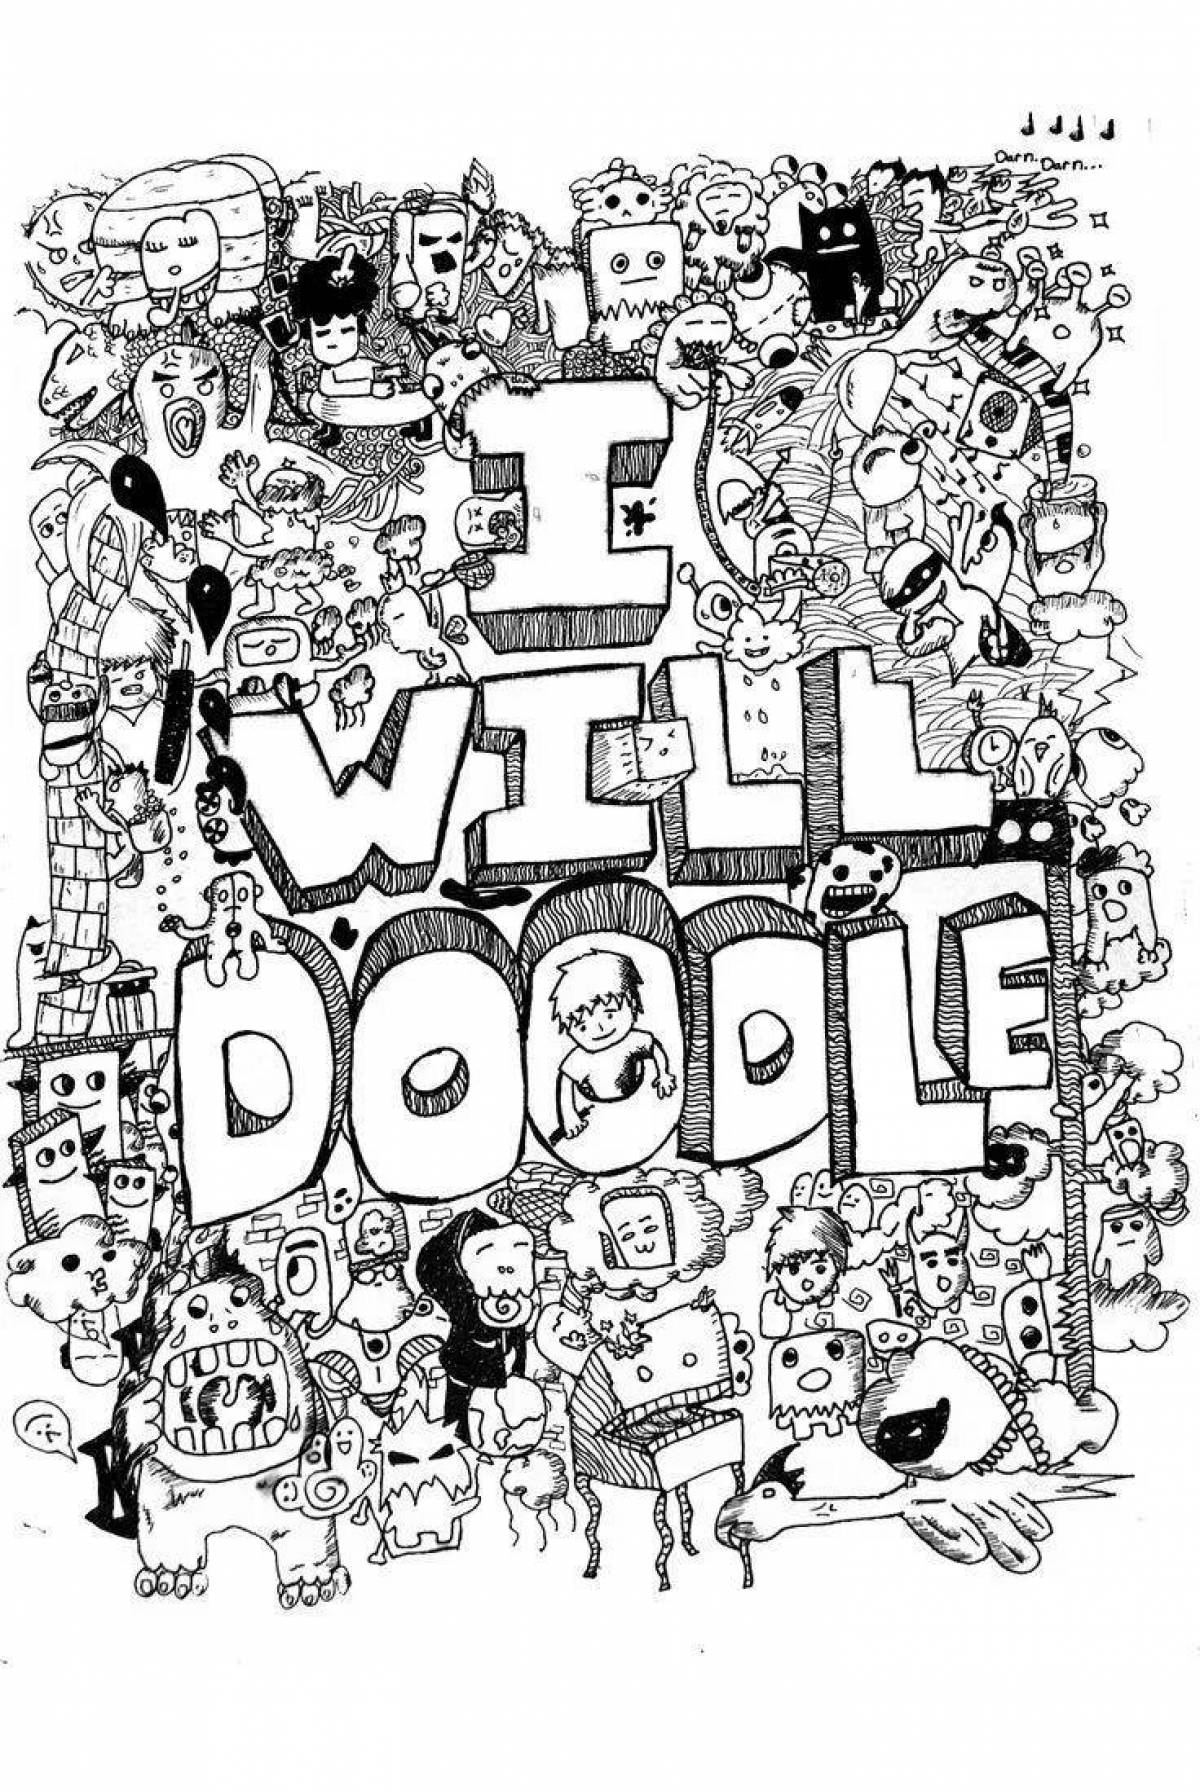 Playful doodle invasion coloring page